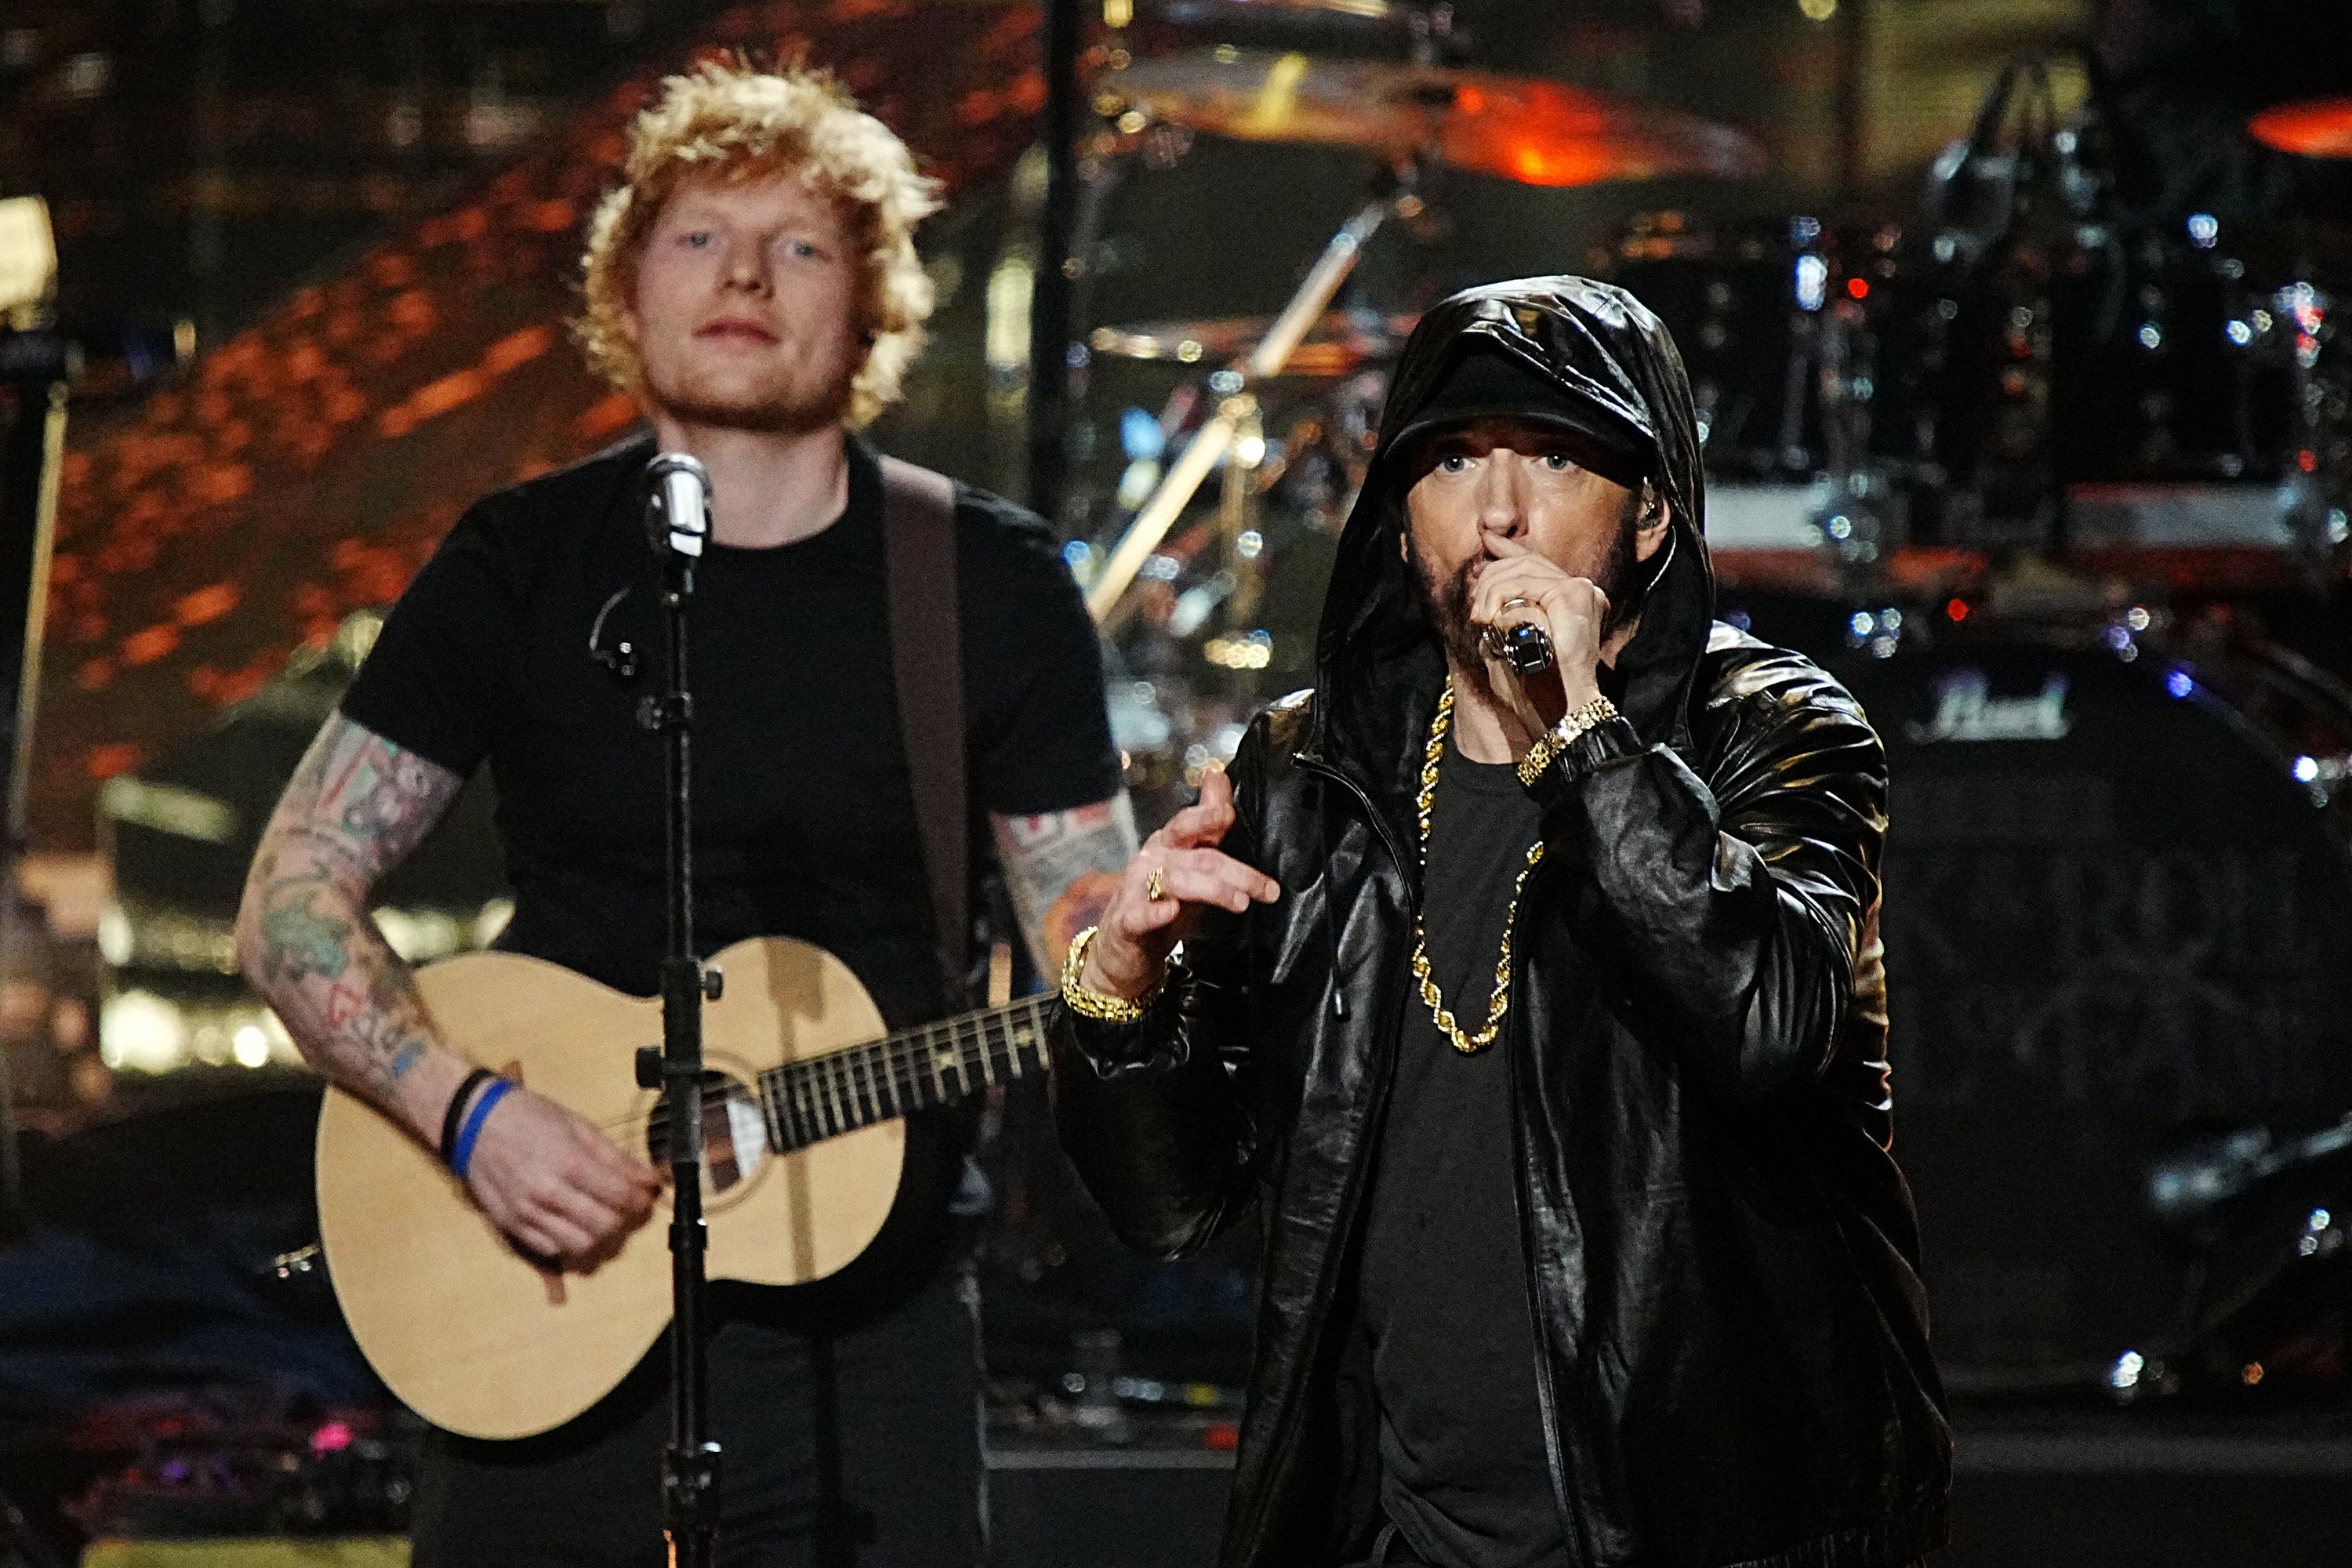 Ed Sheeran and Eminem on stage.